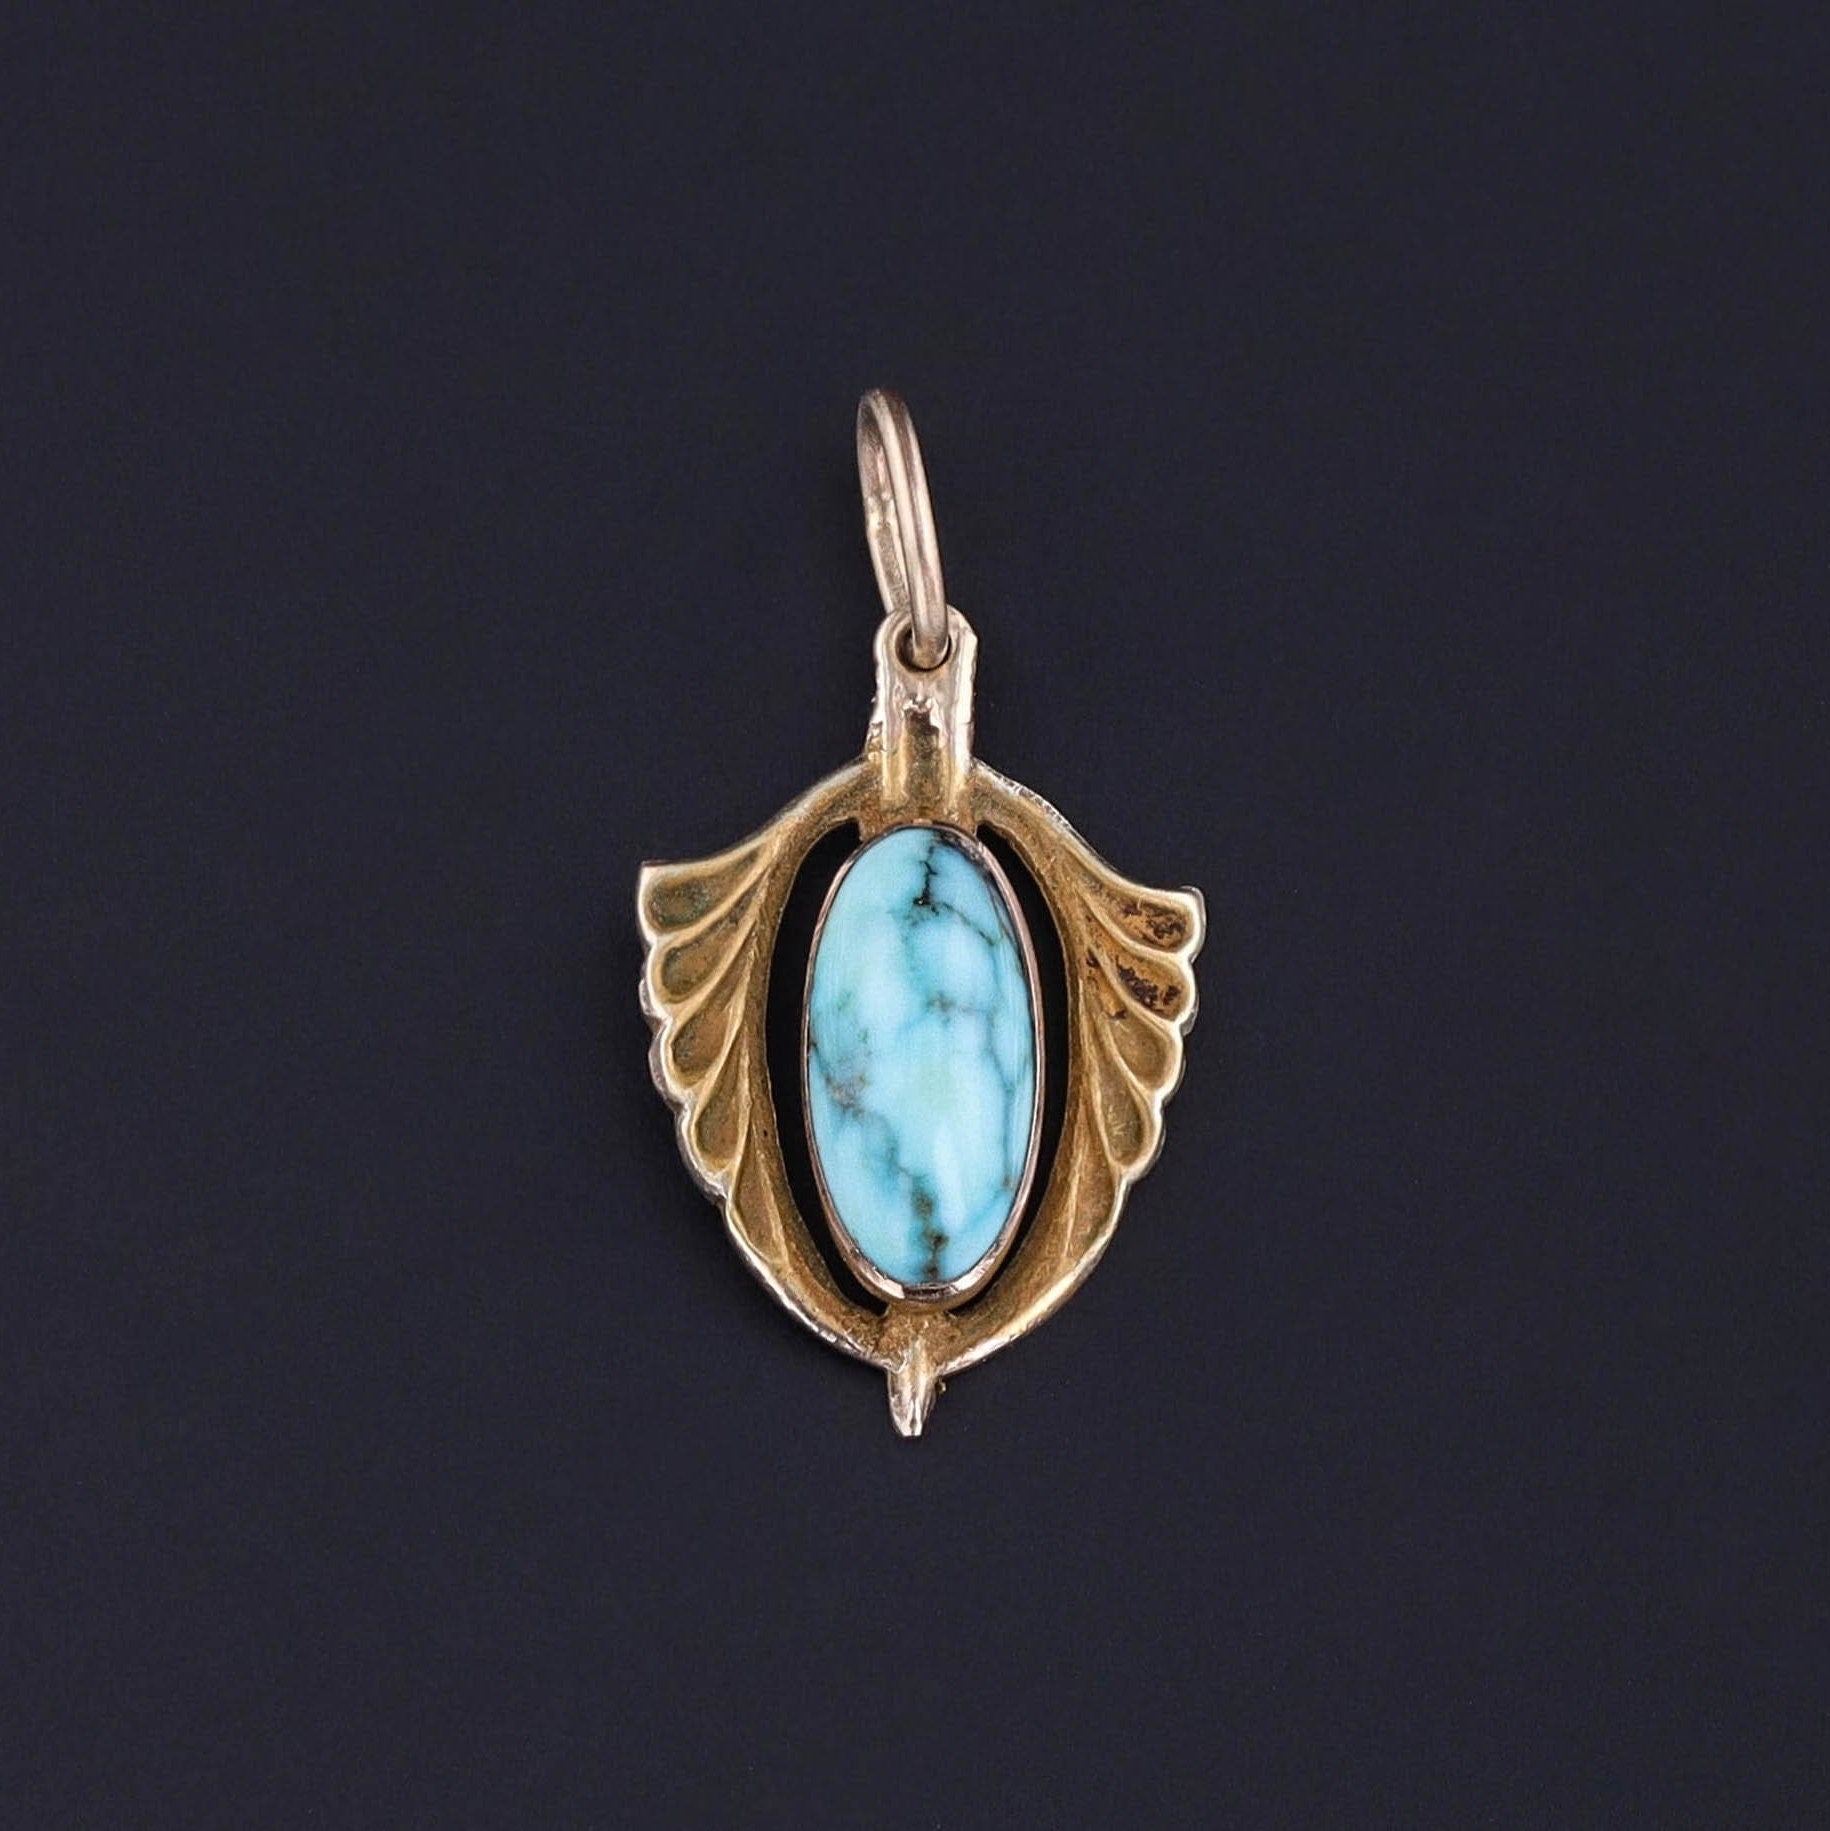 Antique Turquoise Charm of 14k Gold